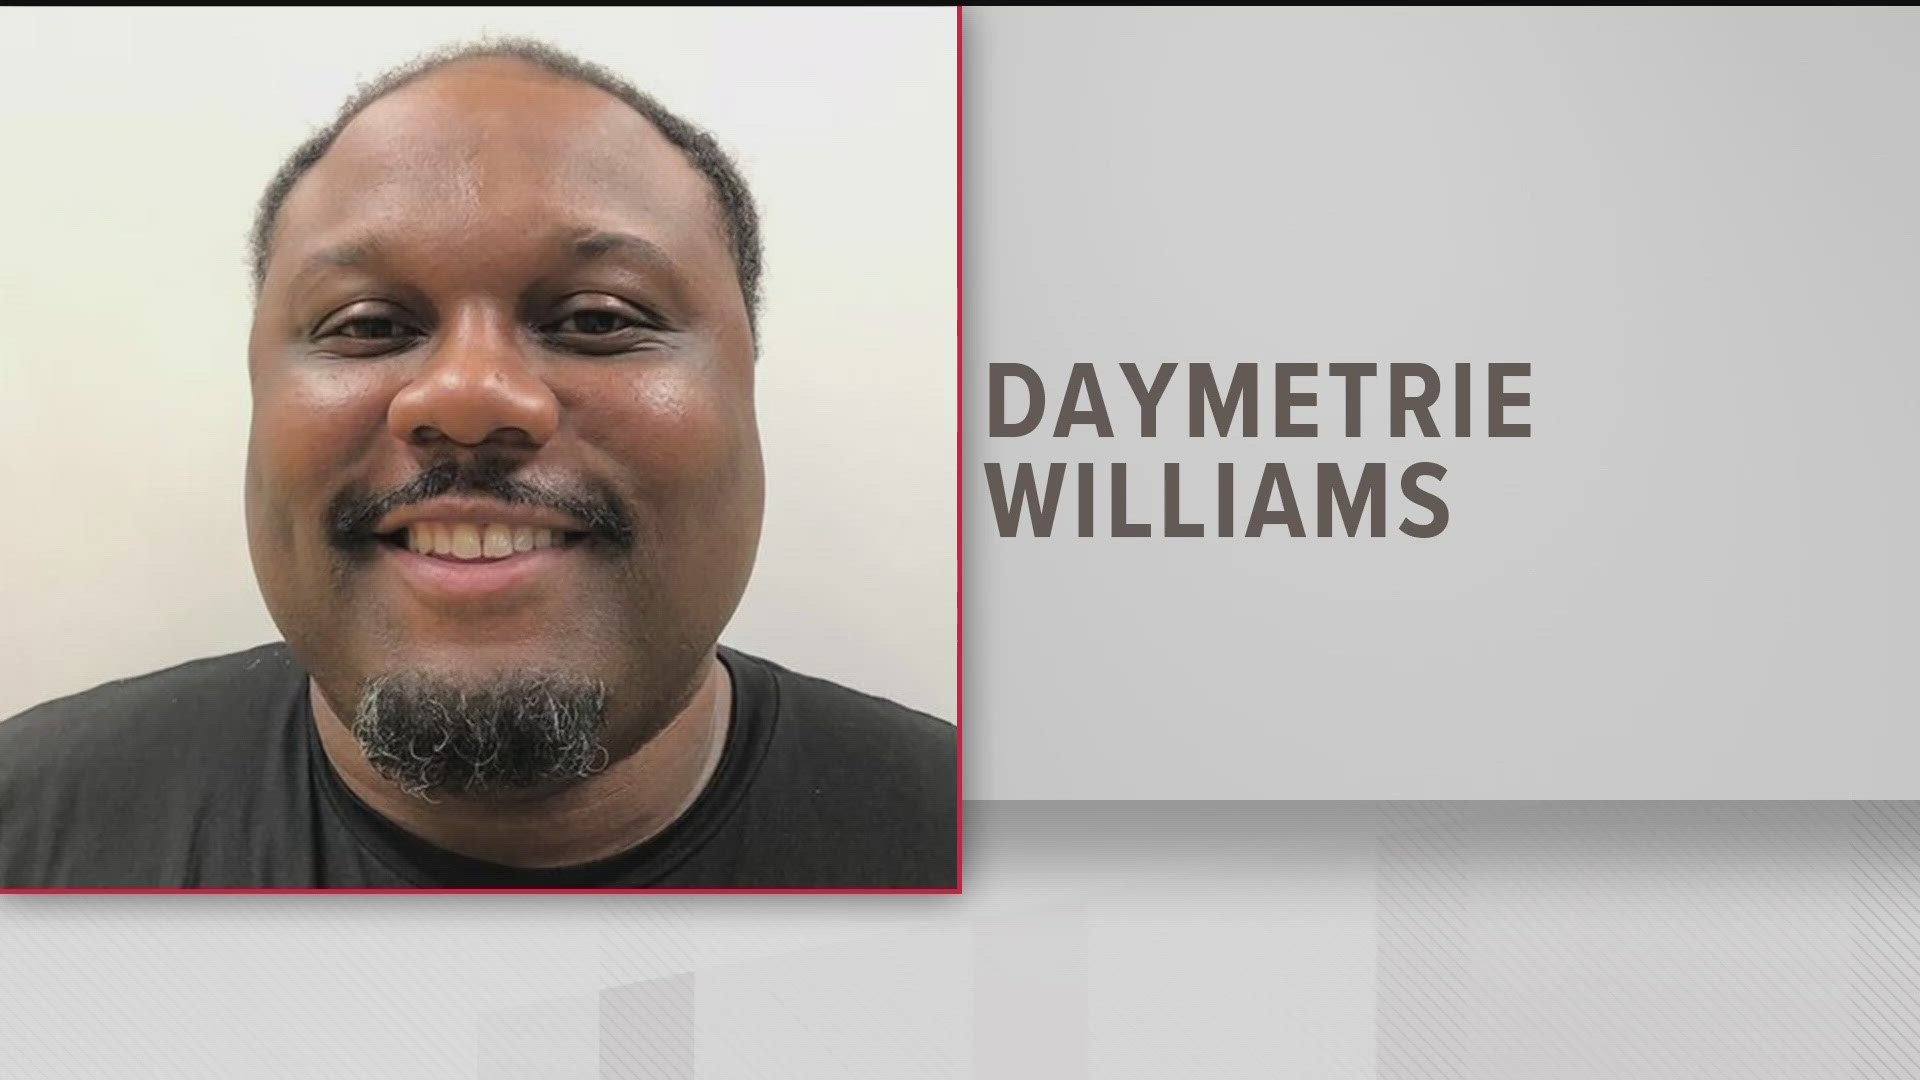 Daymetrie Williams is wanted in Alabama for missing a court appearance related to a 2019 arrest. Here's what we know.